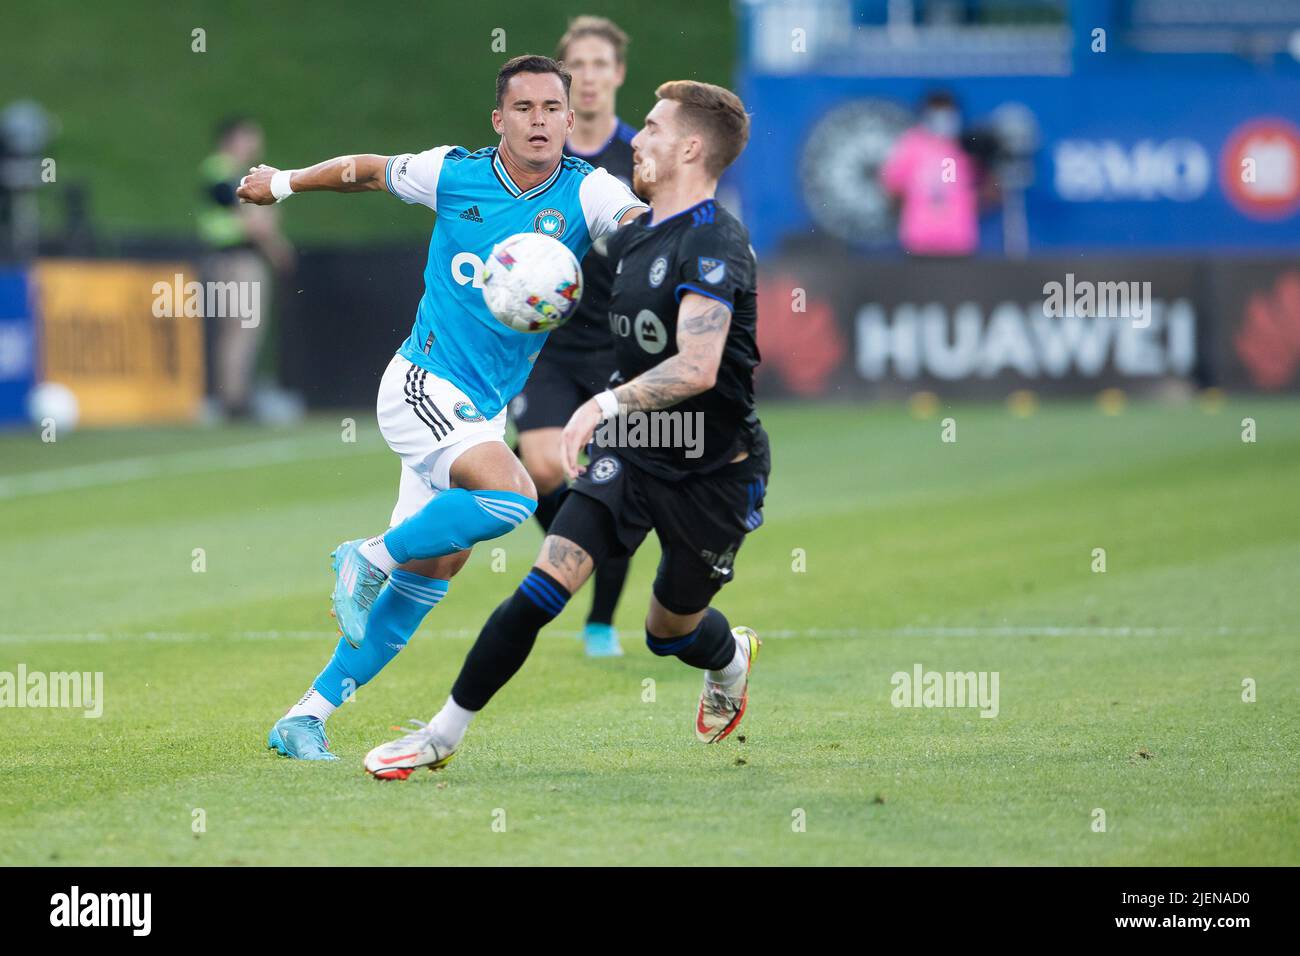 Montreal, Canada. 25th June, 2022. Charlotte FC Koa Santos (36) and CF Montreal Joel Waterman (16) battle for the ball during the MLS match between Charlotte FC and CF Montreal held at Saputo Stadium in Montreal, Canada. Daniel Lea/CSM/Alamy Live News Stock Photo